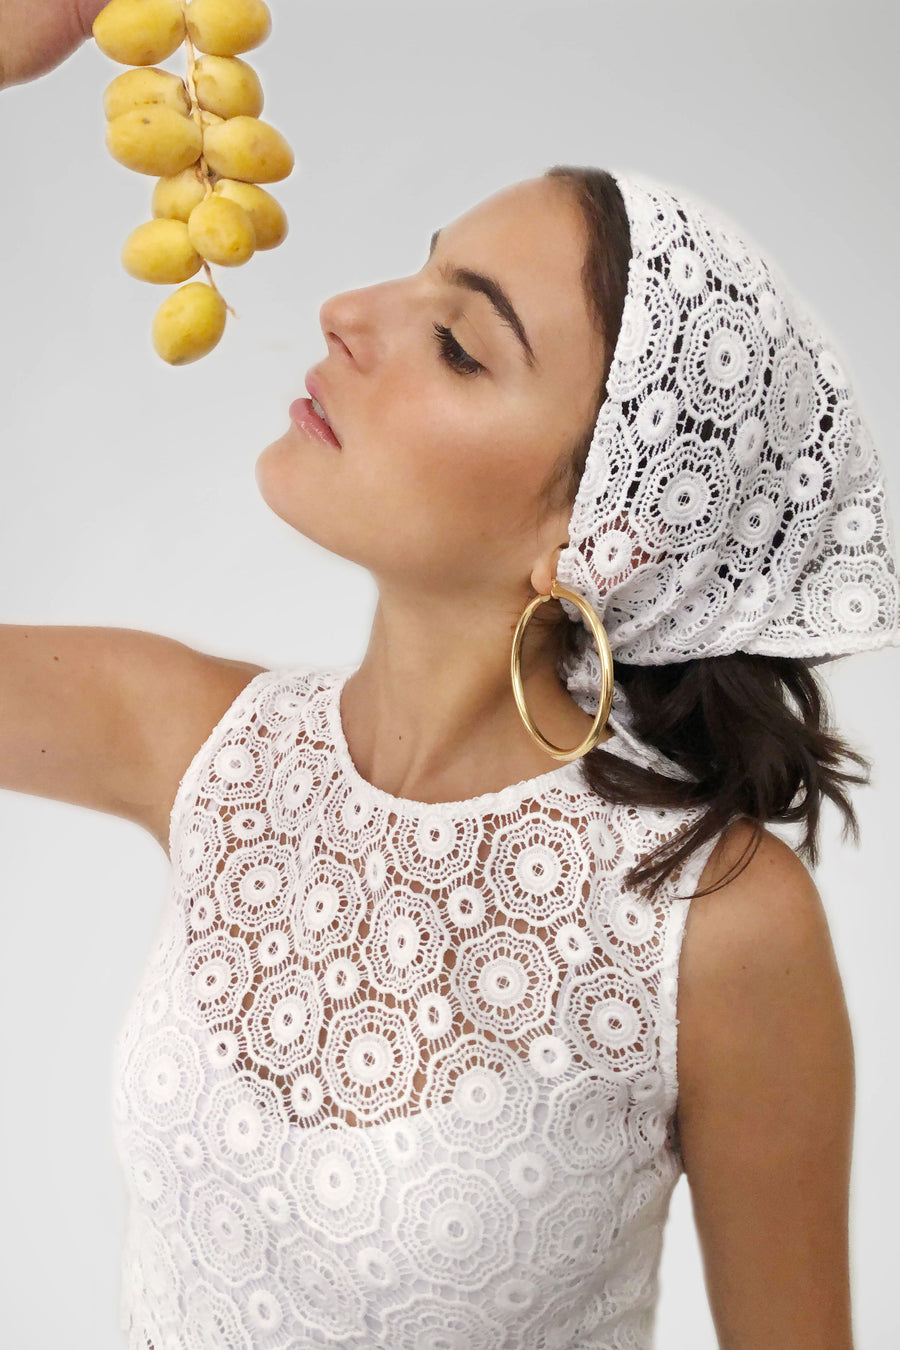 This is a photo of a girl wearing a lace headscarf with gold hoops and matching lace crop top. She is holding fruit above her face.